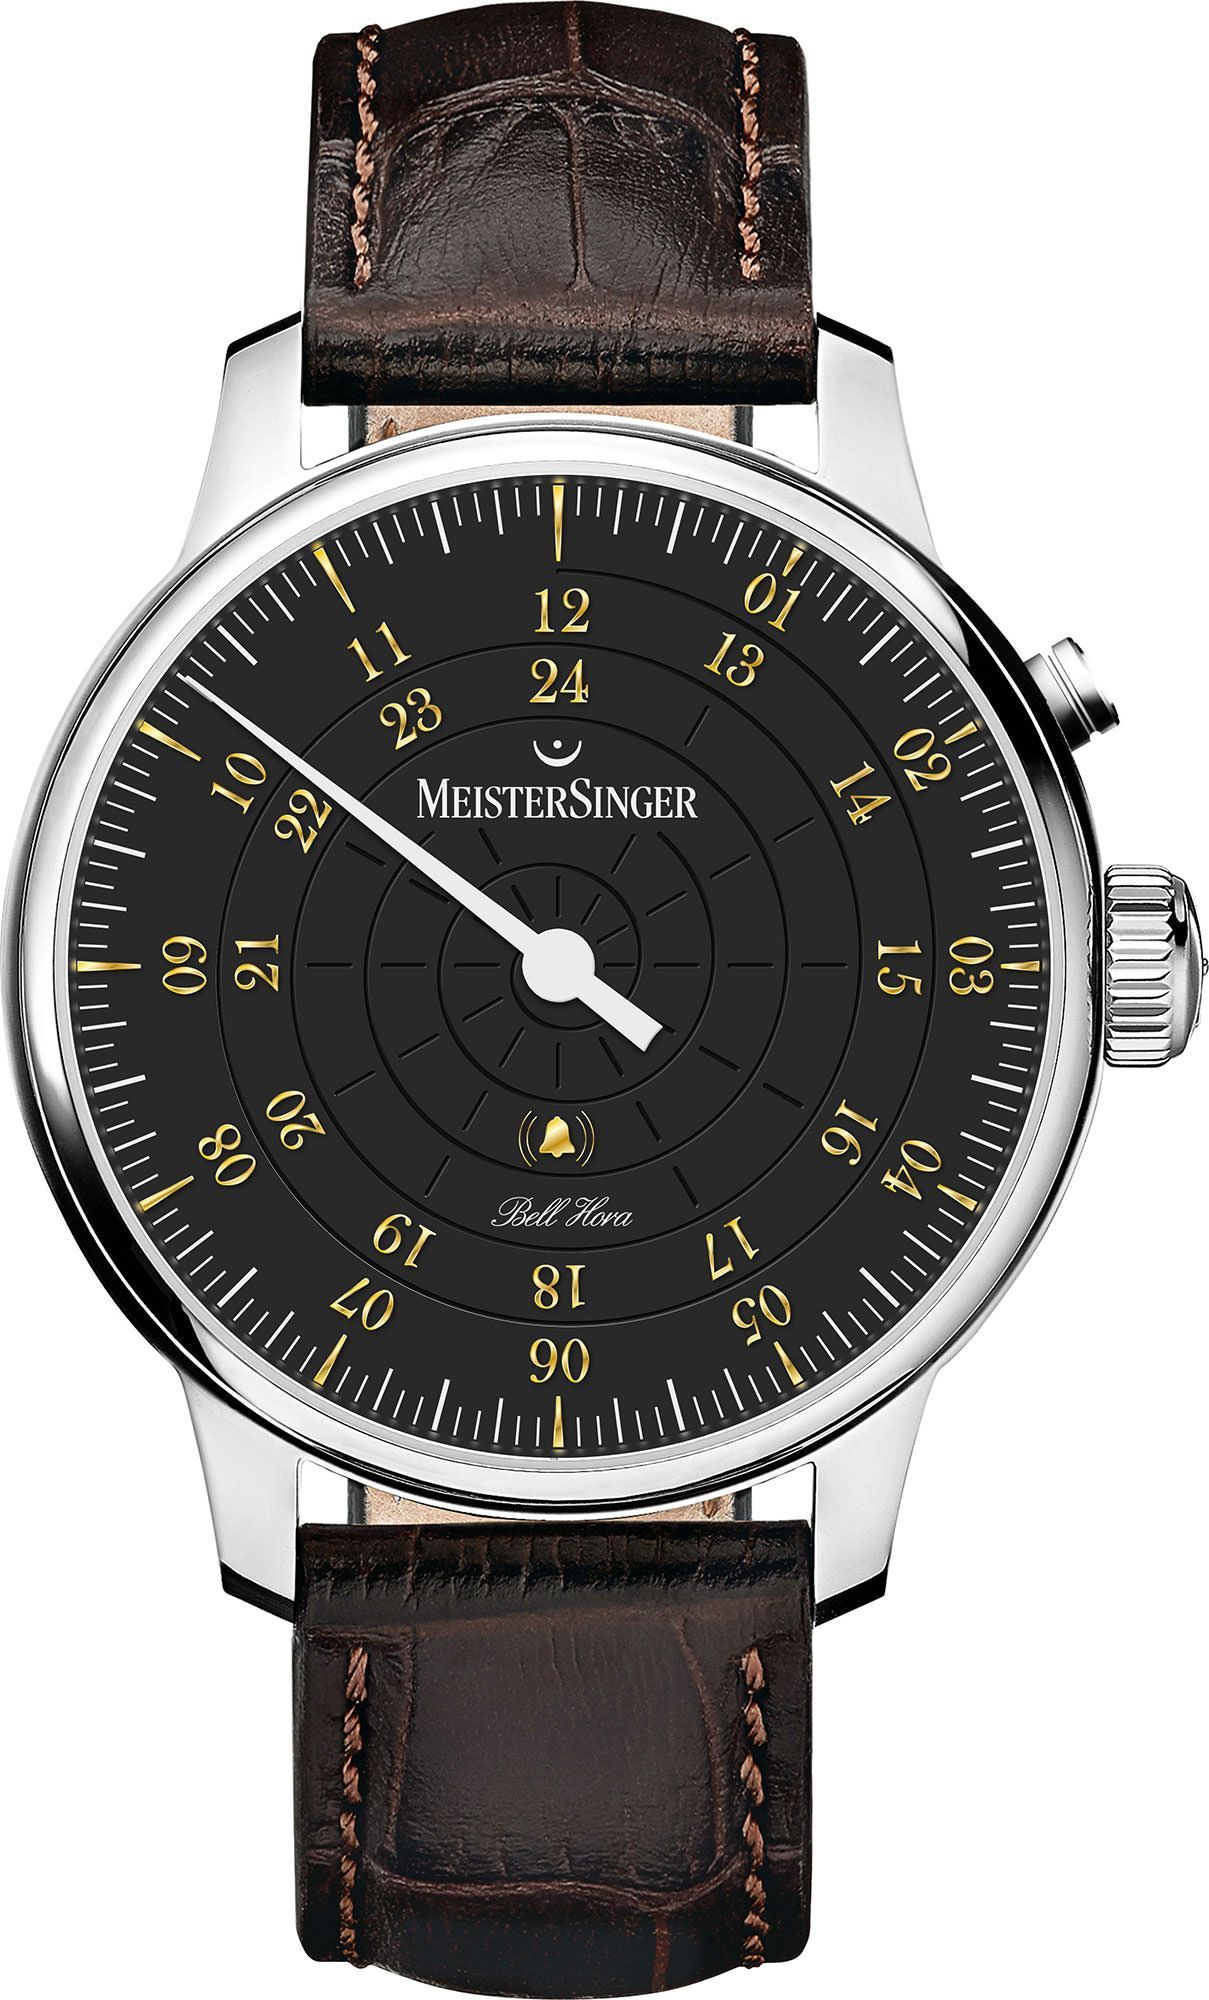 MeisterSinger Bell Hora  Black Dial 43 mm Automatic Watch For Men - 1